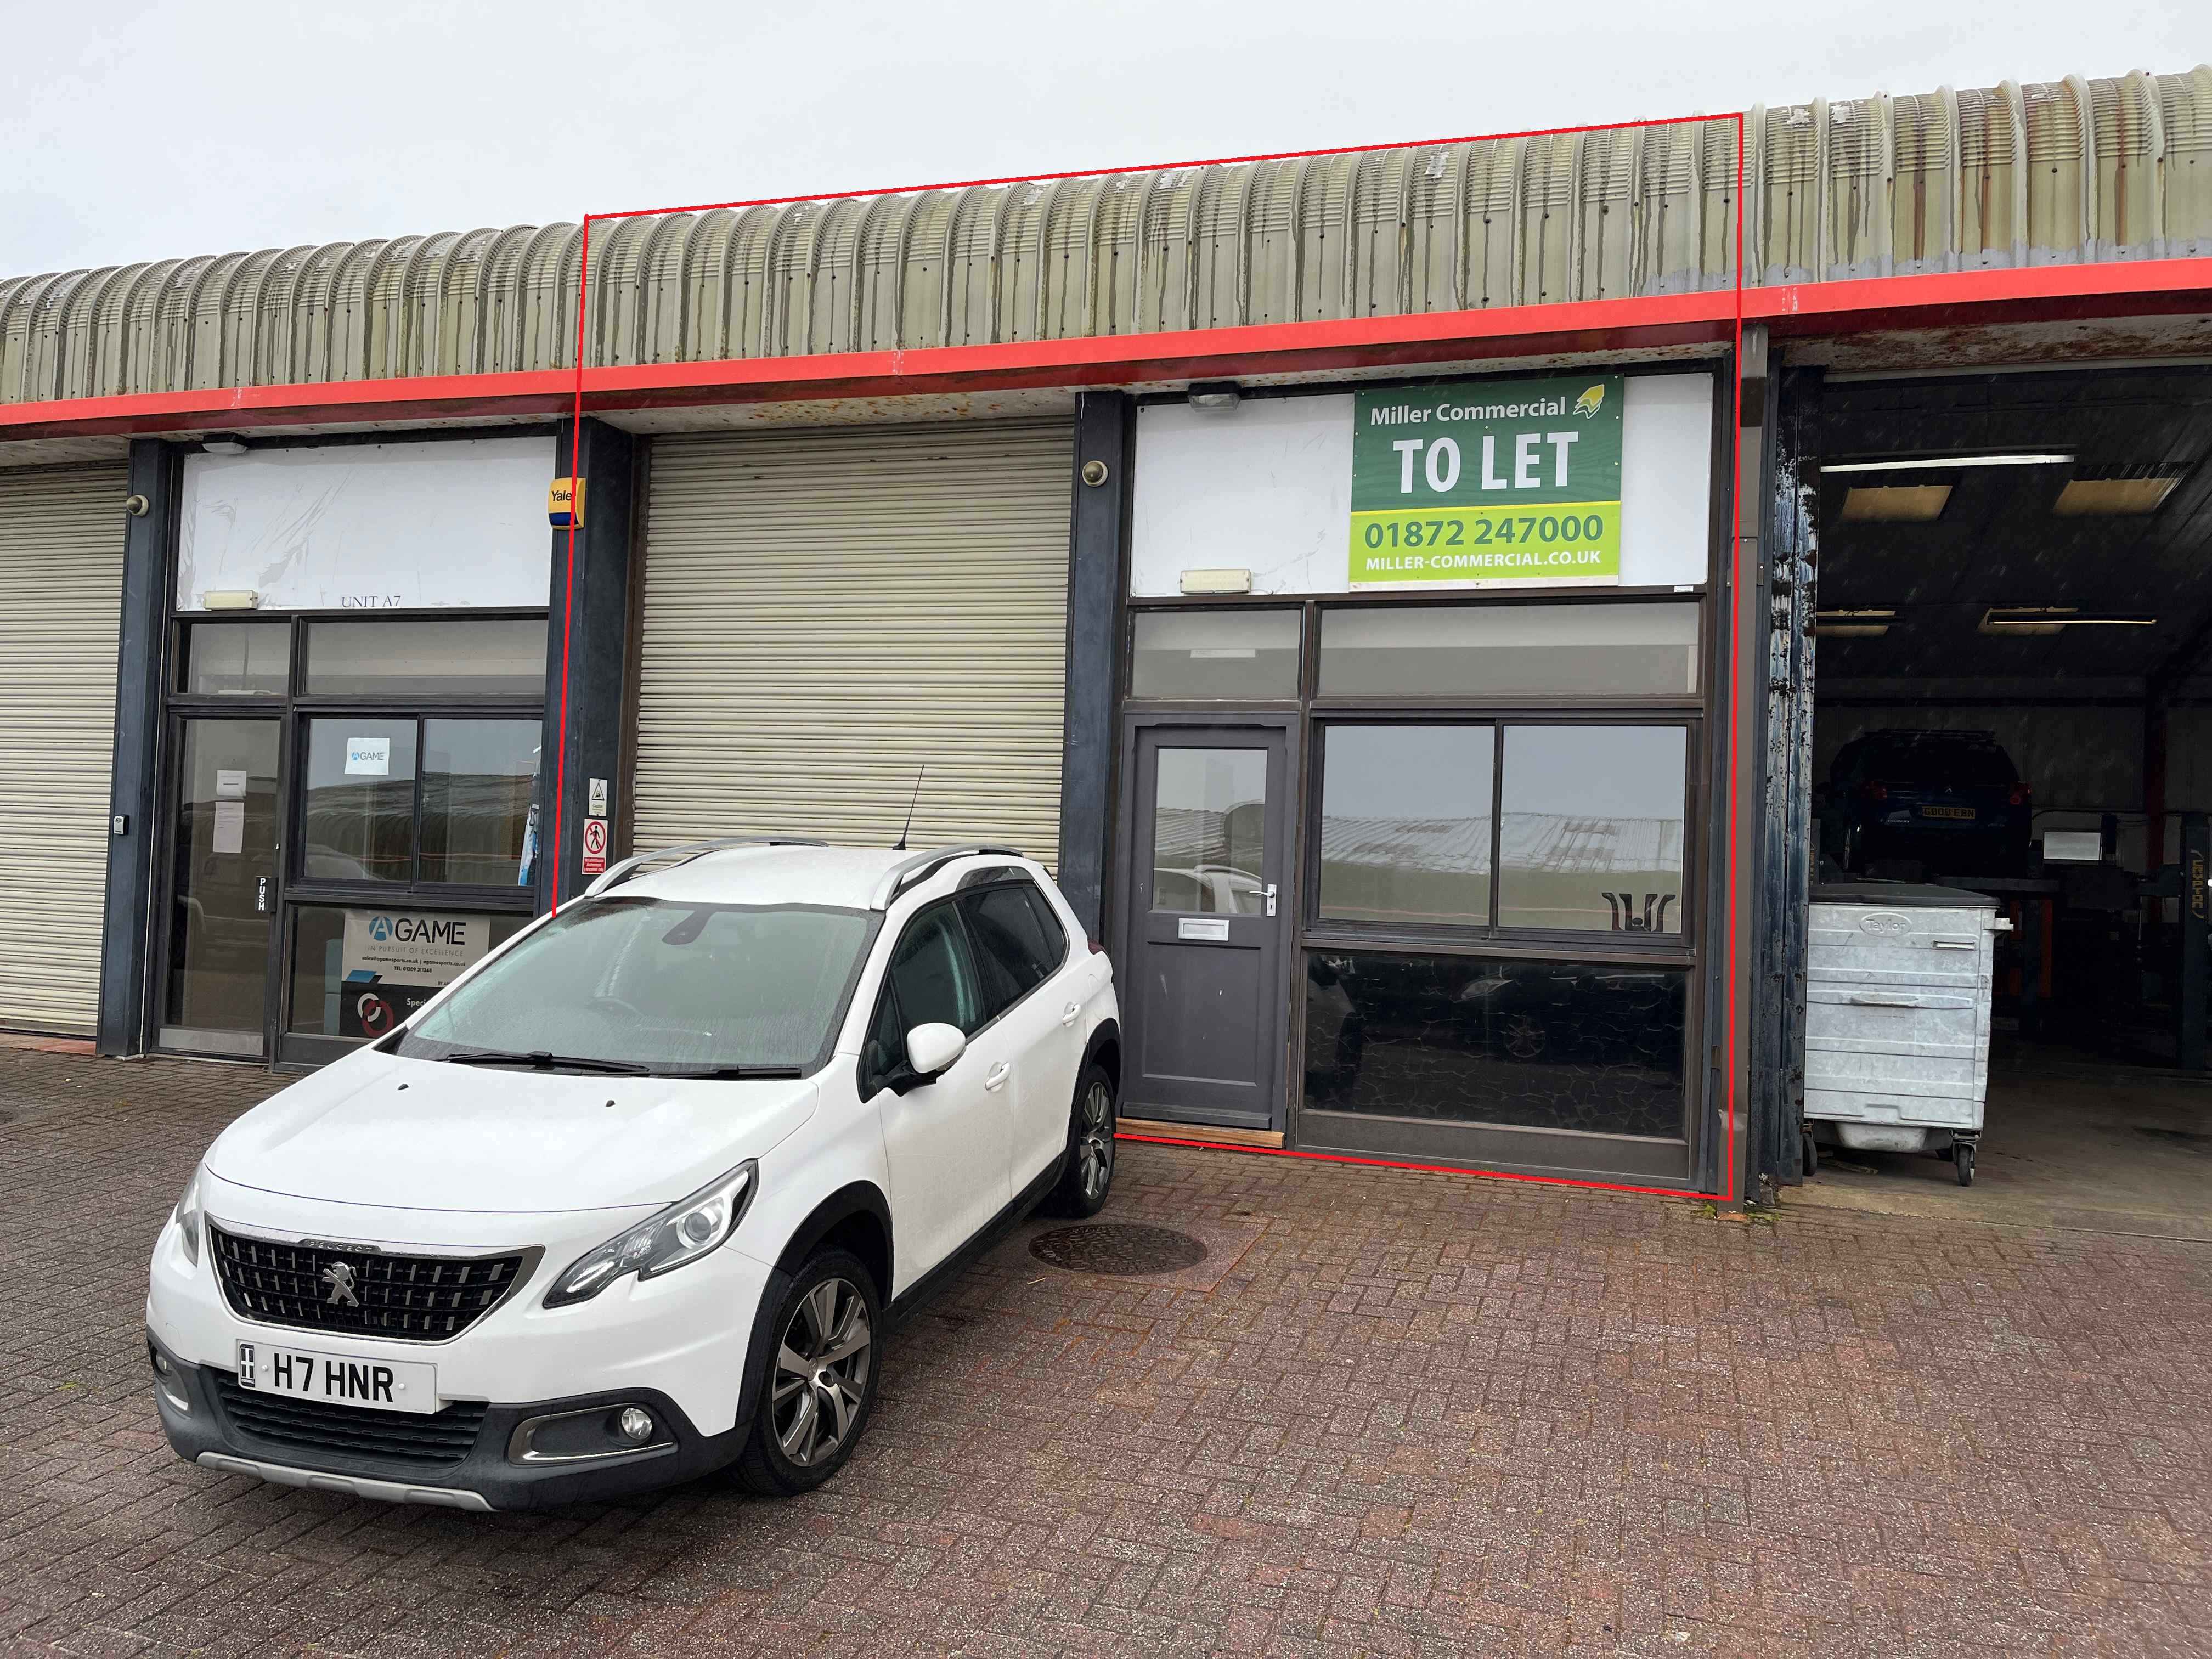 0 bed Light Industrial for rent in Redruth. From Miller Commercial - Commercial